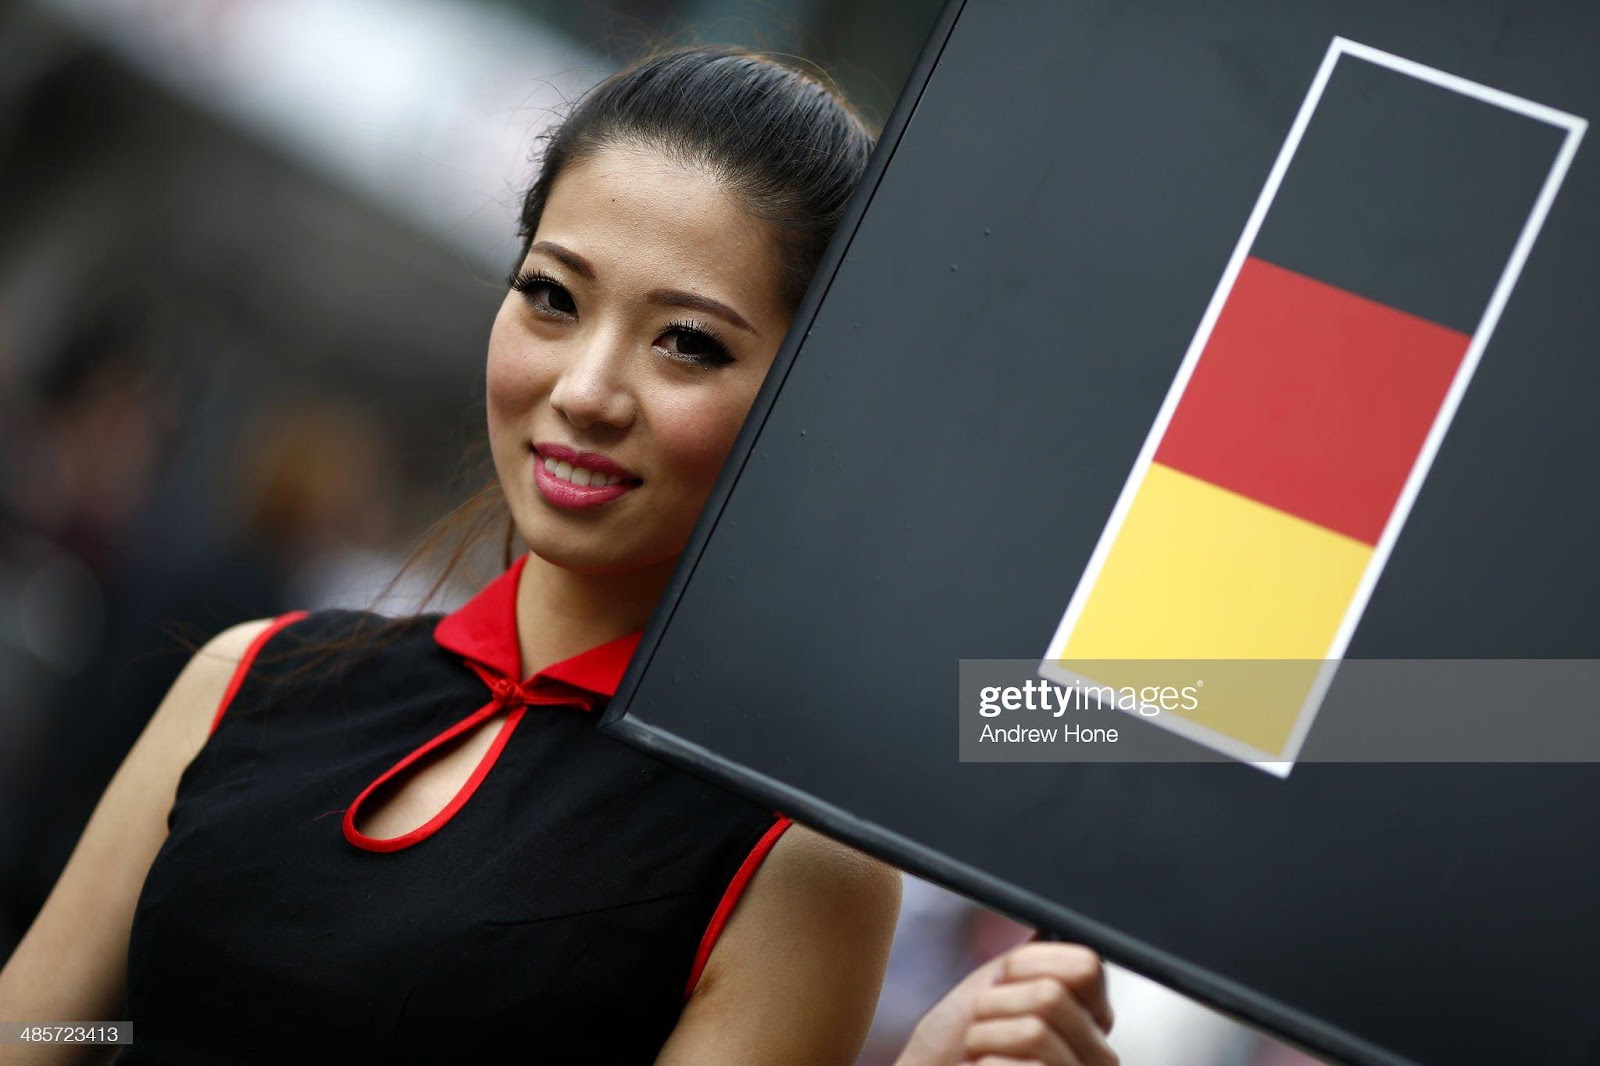 D:\Documenti\posts\posts\Women and motorsport\foto\Getty e altre\grid-girl-holds-up-the-board-belonging-to-sebastian-vettel-of-germany-picture-id485723413.jpg